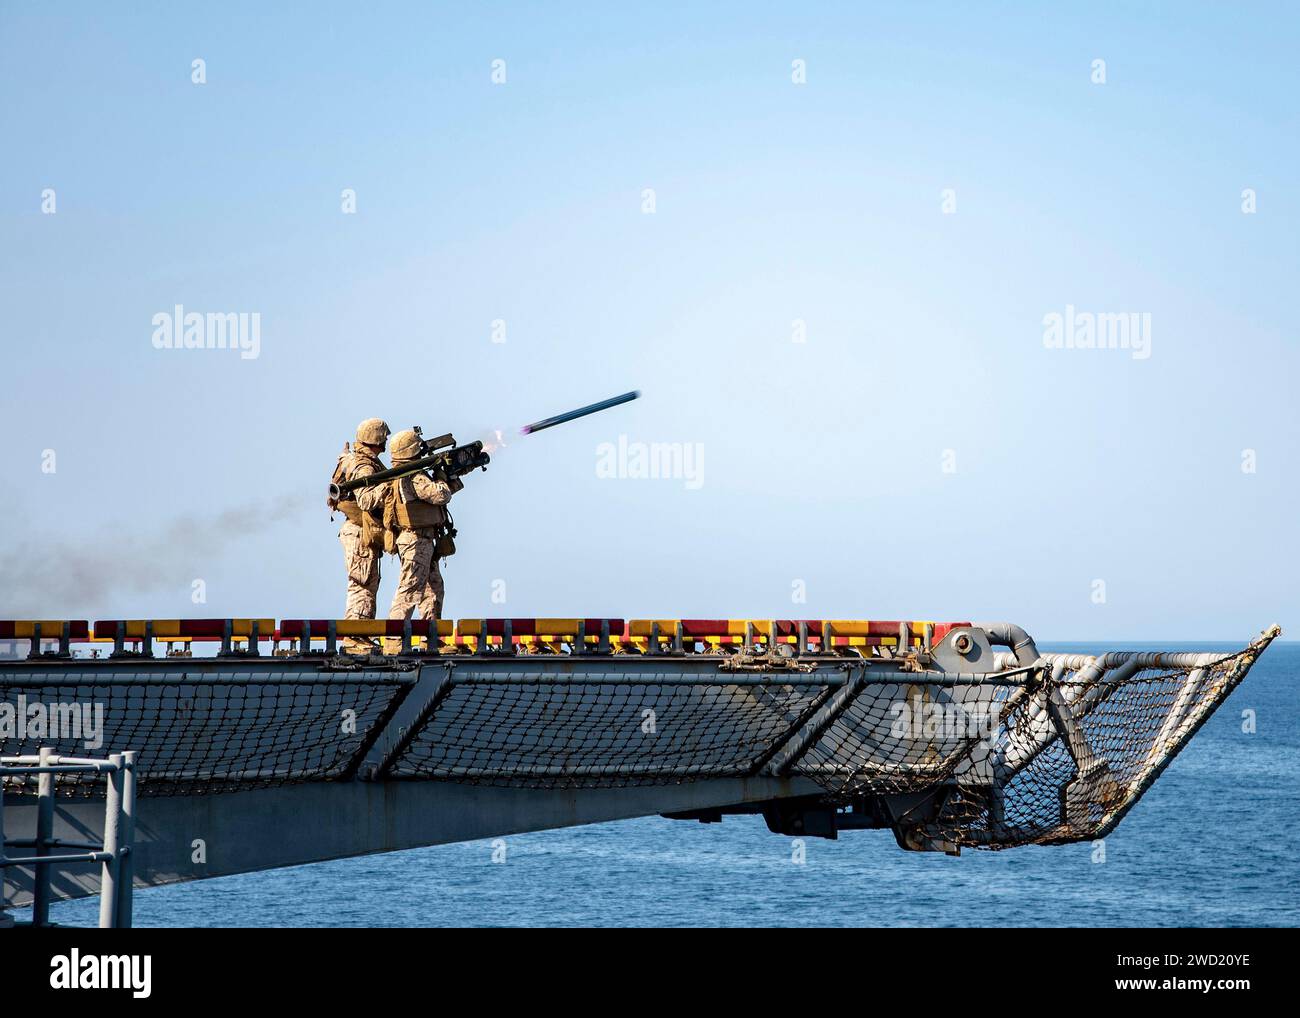 U.S. Marine fires a FIM-92 Stinger anti-aircraft missile from the flight deck of USS Essex. Stock Photo